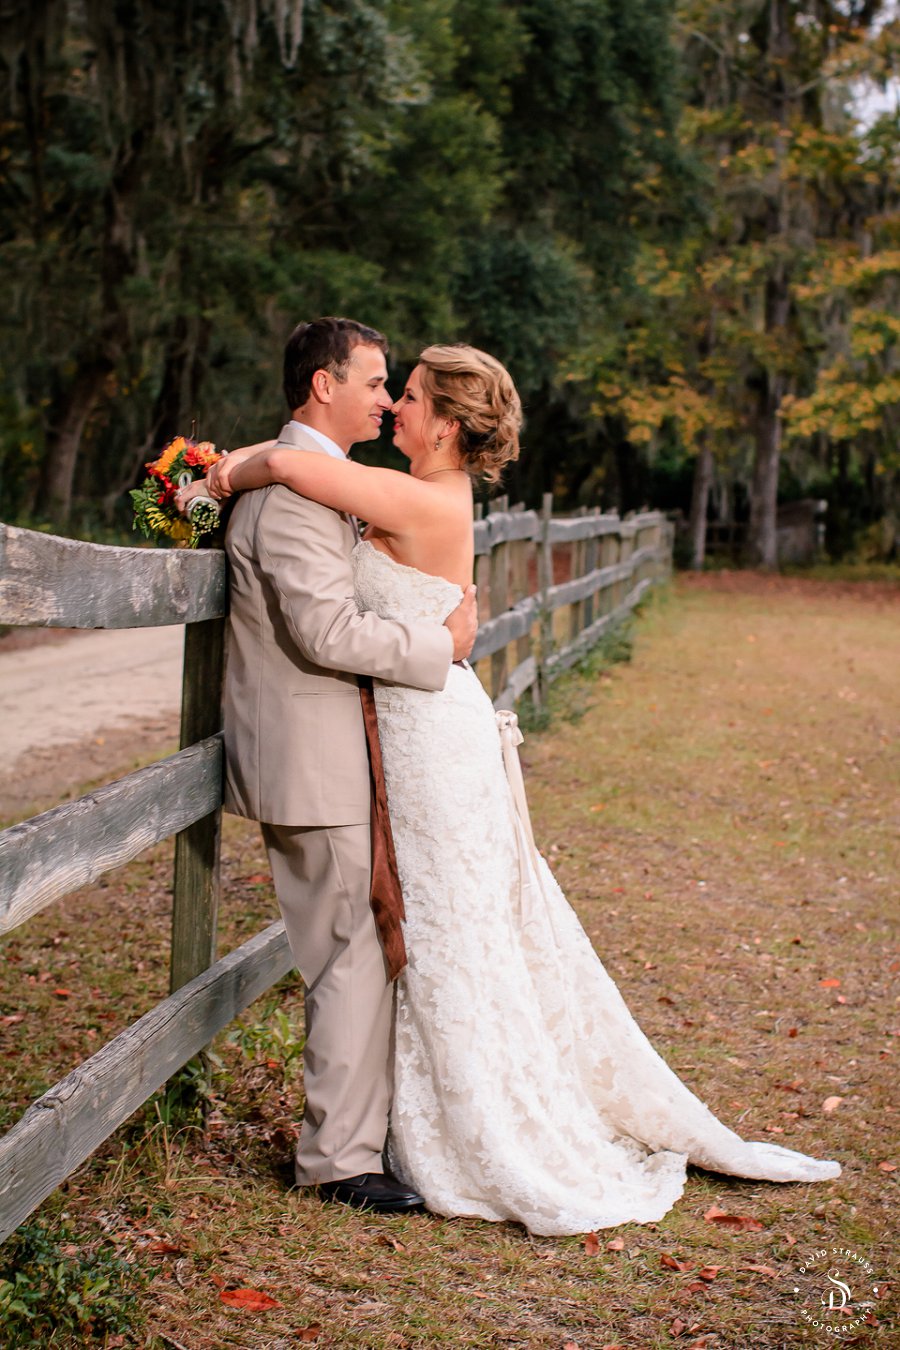 Old Wide Awake Plantation Wedding Photography - Top Charleston Venues - Bette and Anthony - 24